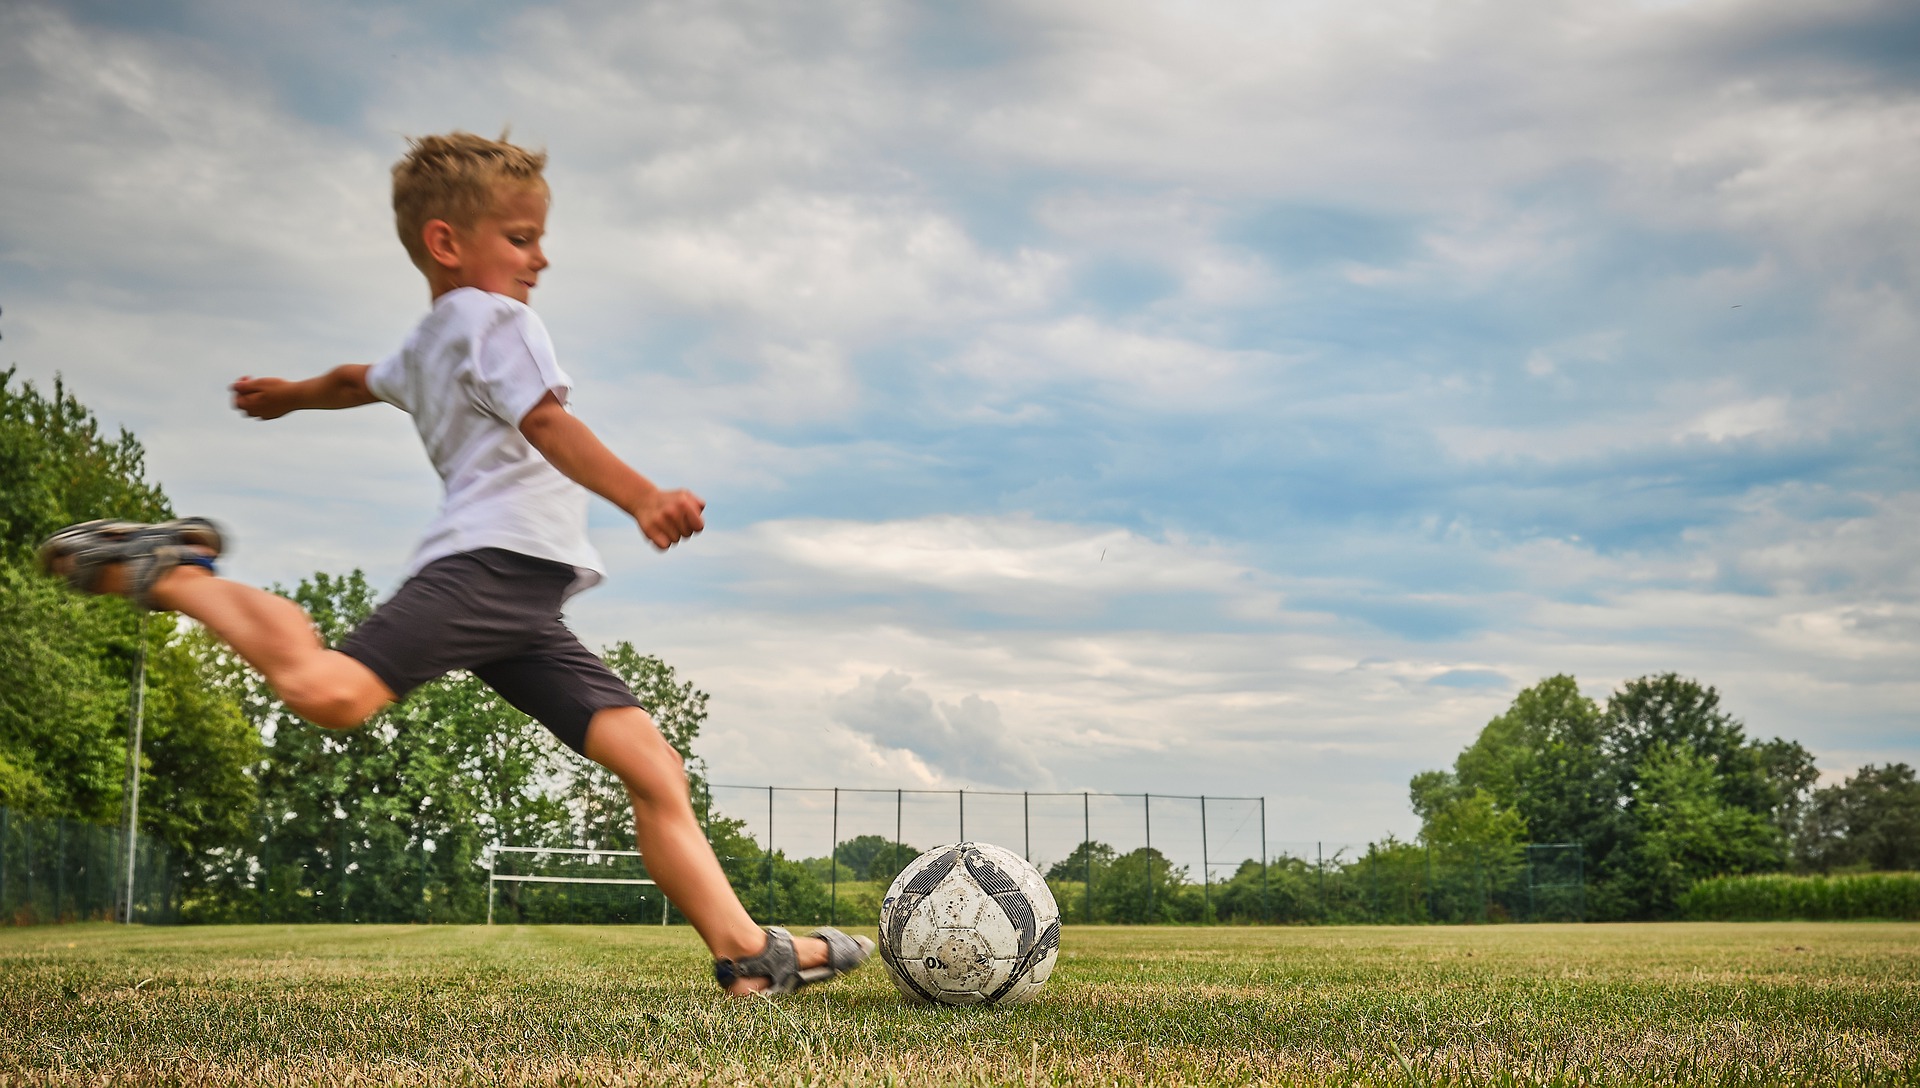 A young boy about to kick a football on a grass field.